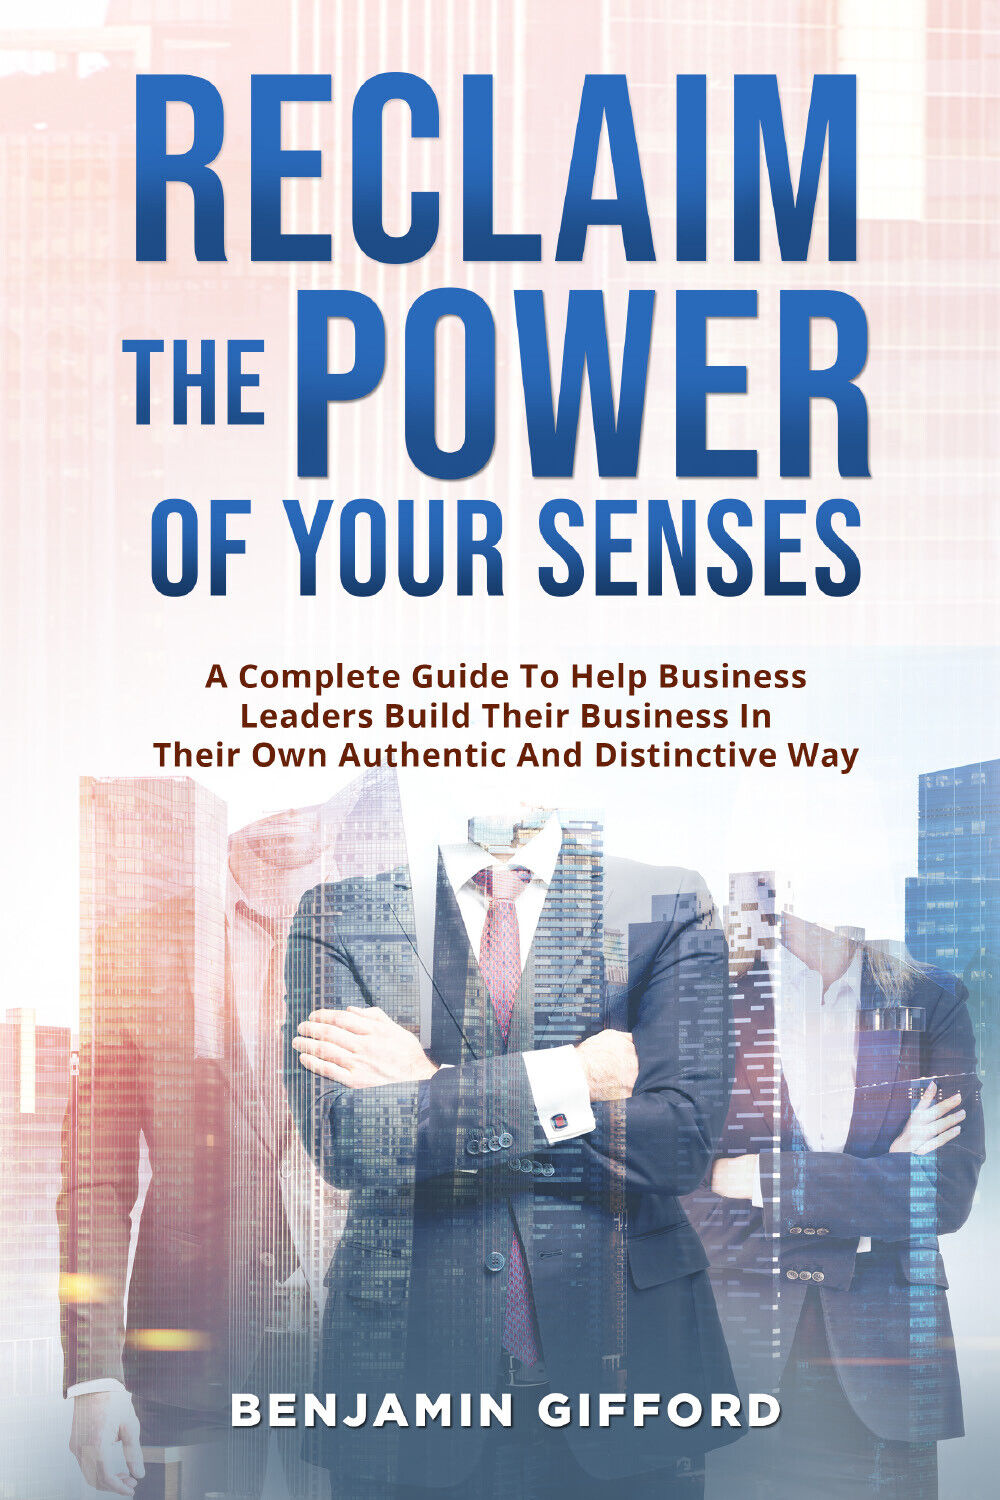 Reclaim the Power of Your Senses. A Complete Guide To Help Business Leaders Buil